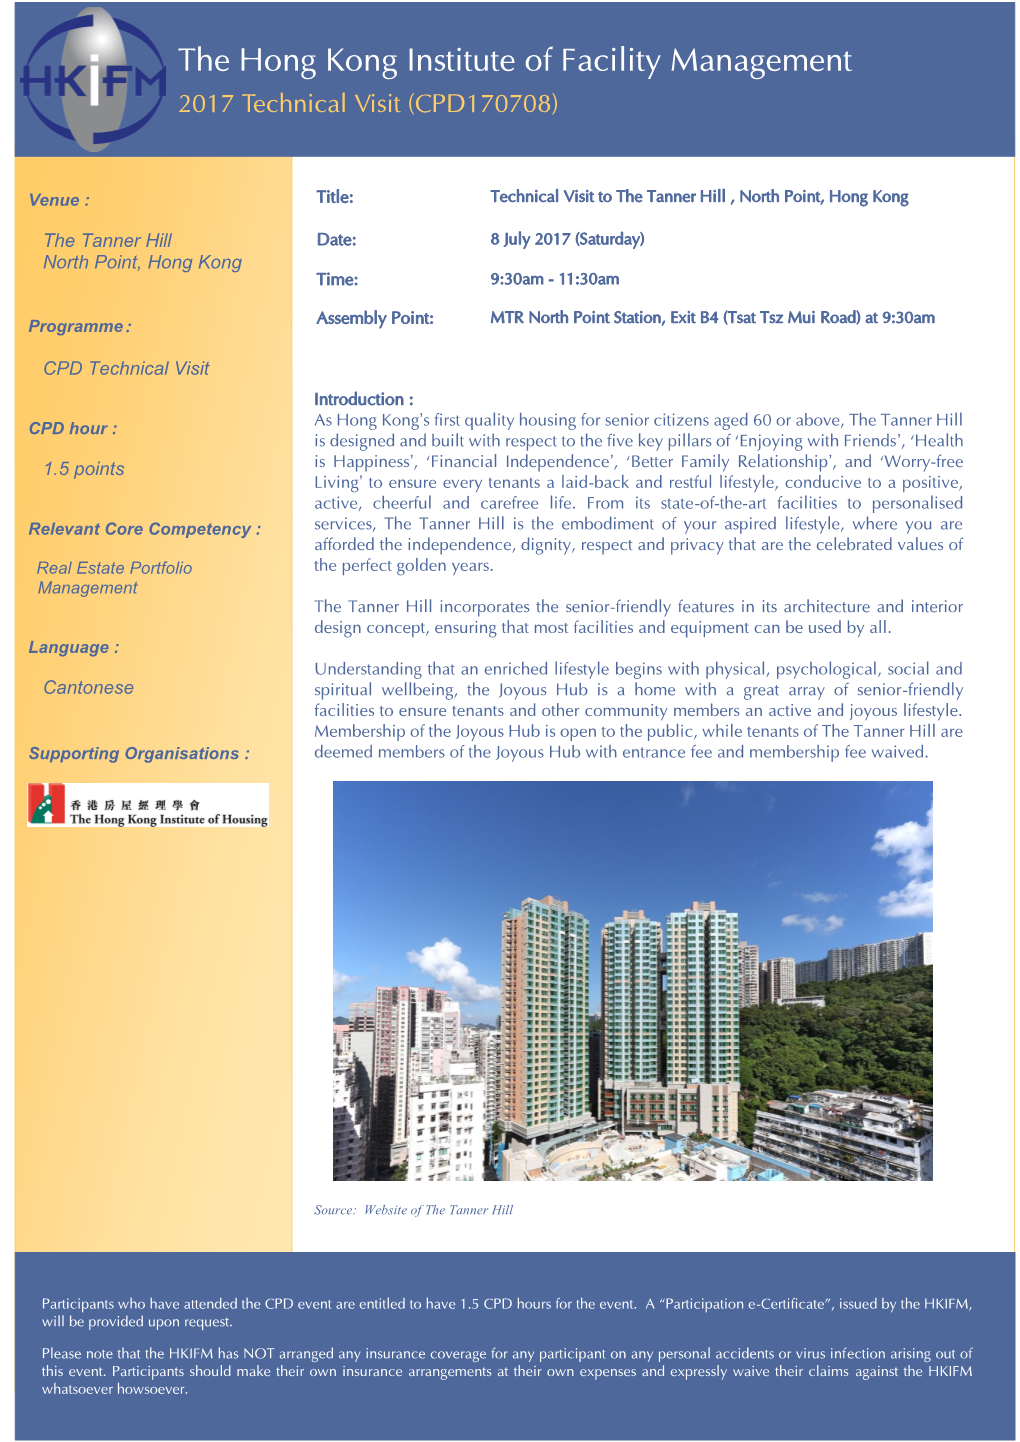 The Hong Kong Institute of Facility Management 2017 Technical Visit (CPD170708)